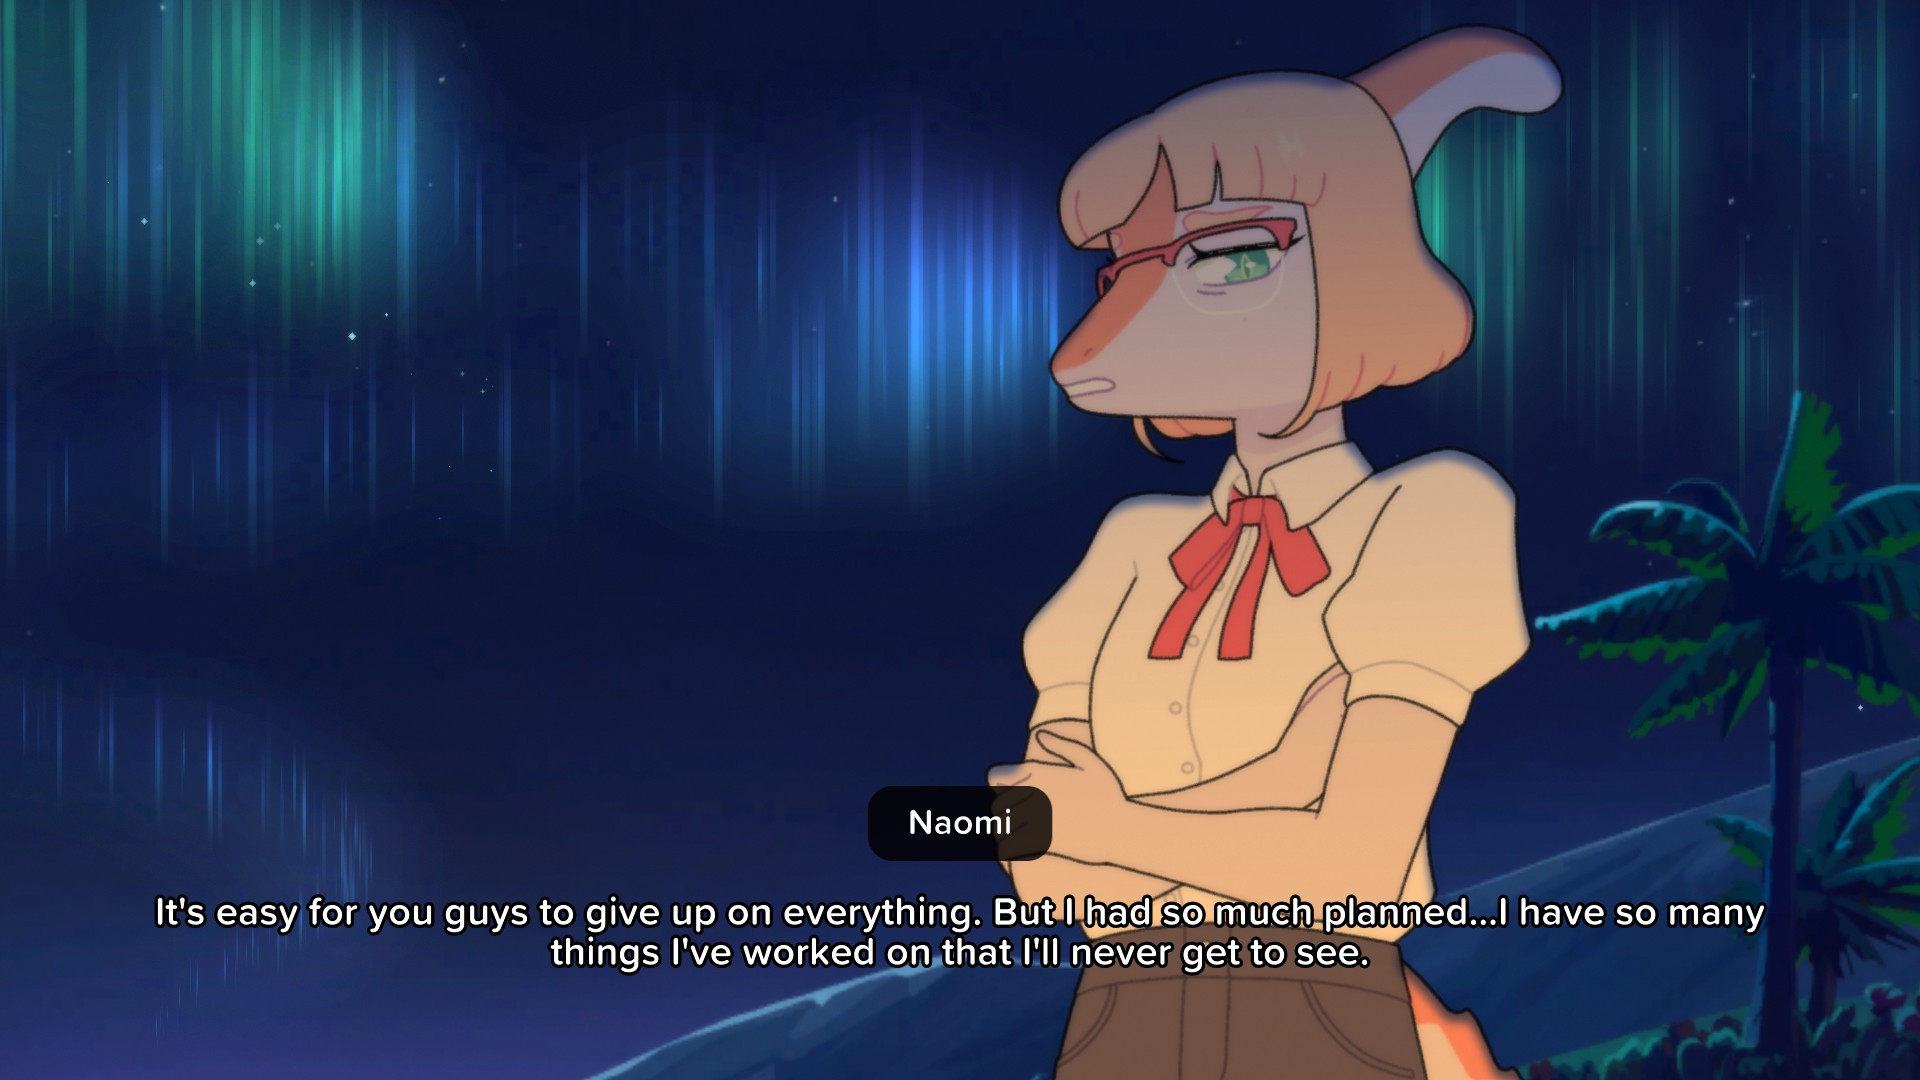 A frustrated Naomi, saying 'It's easy for you guys to give up on everything. But I had so much planned... I have so many things I've worked on that I'll never get to see.'